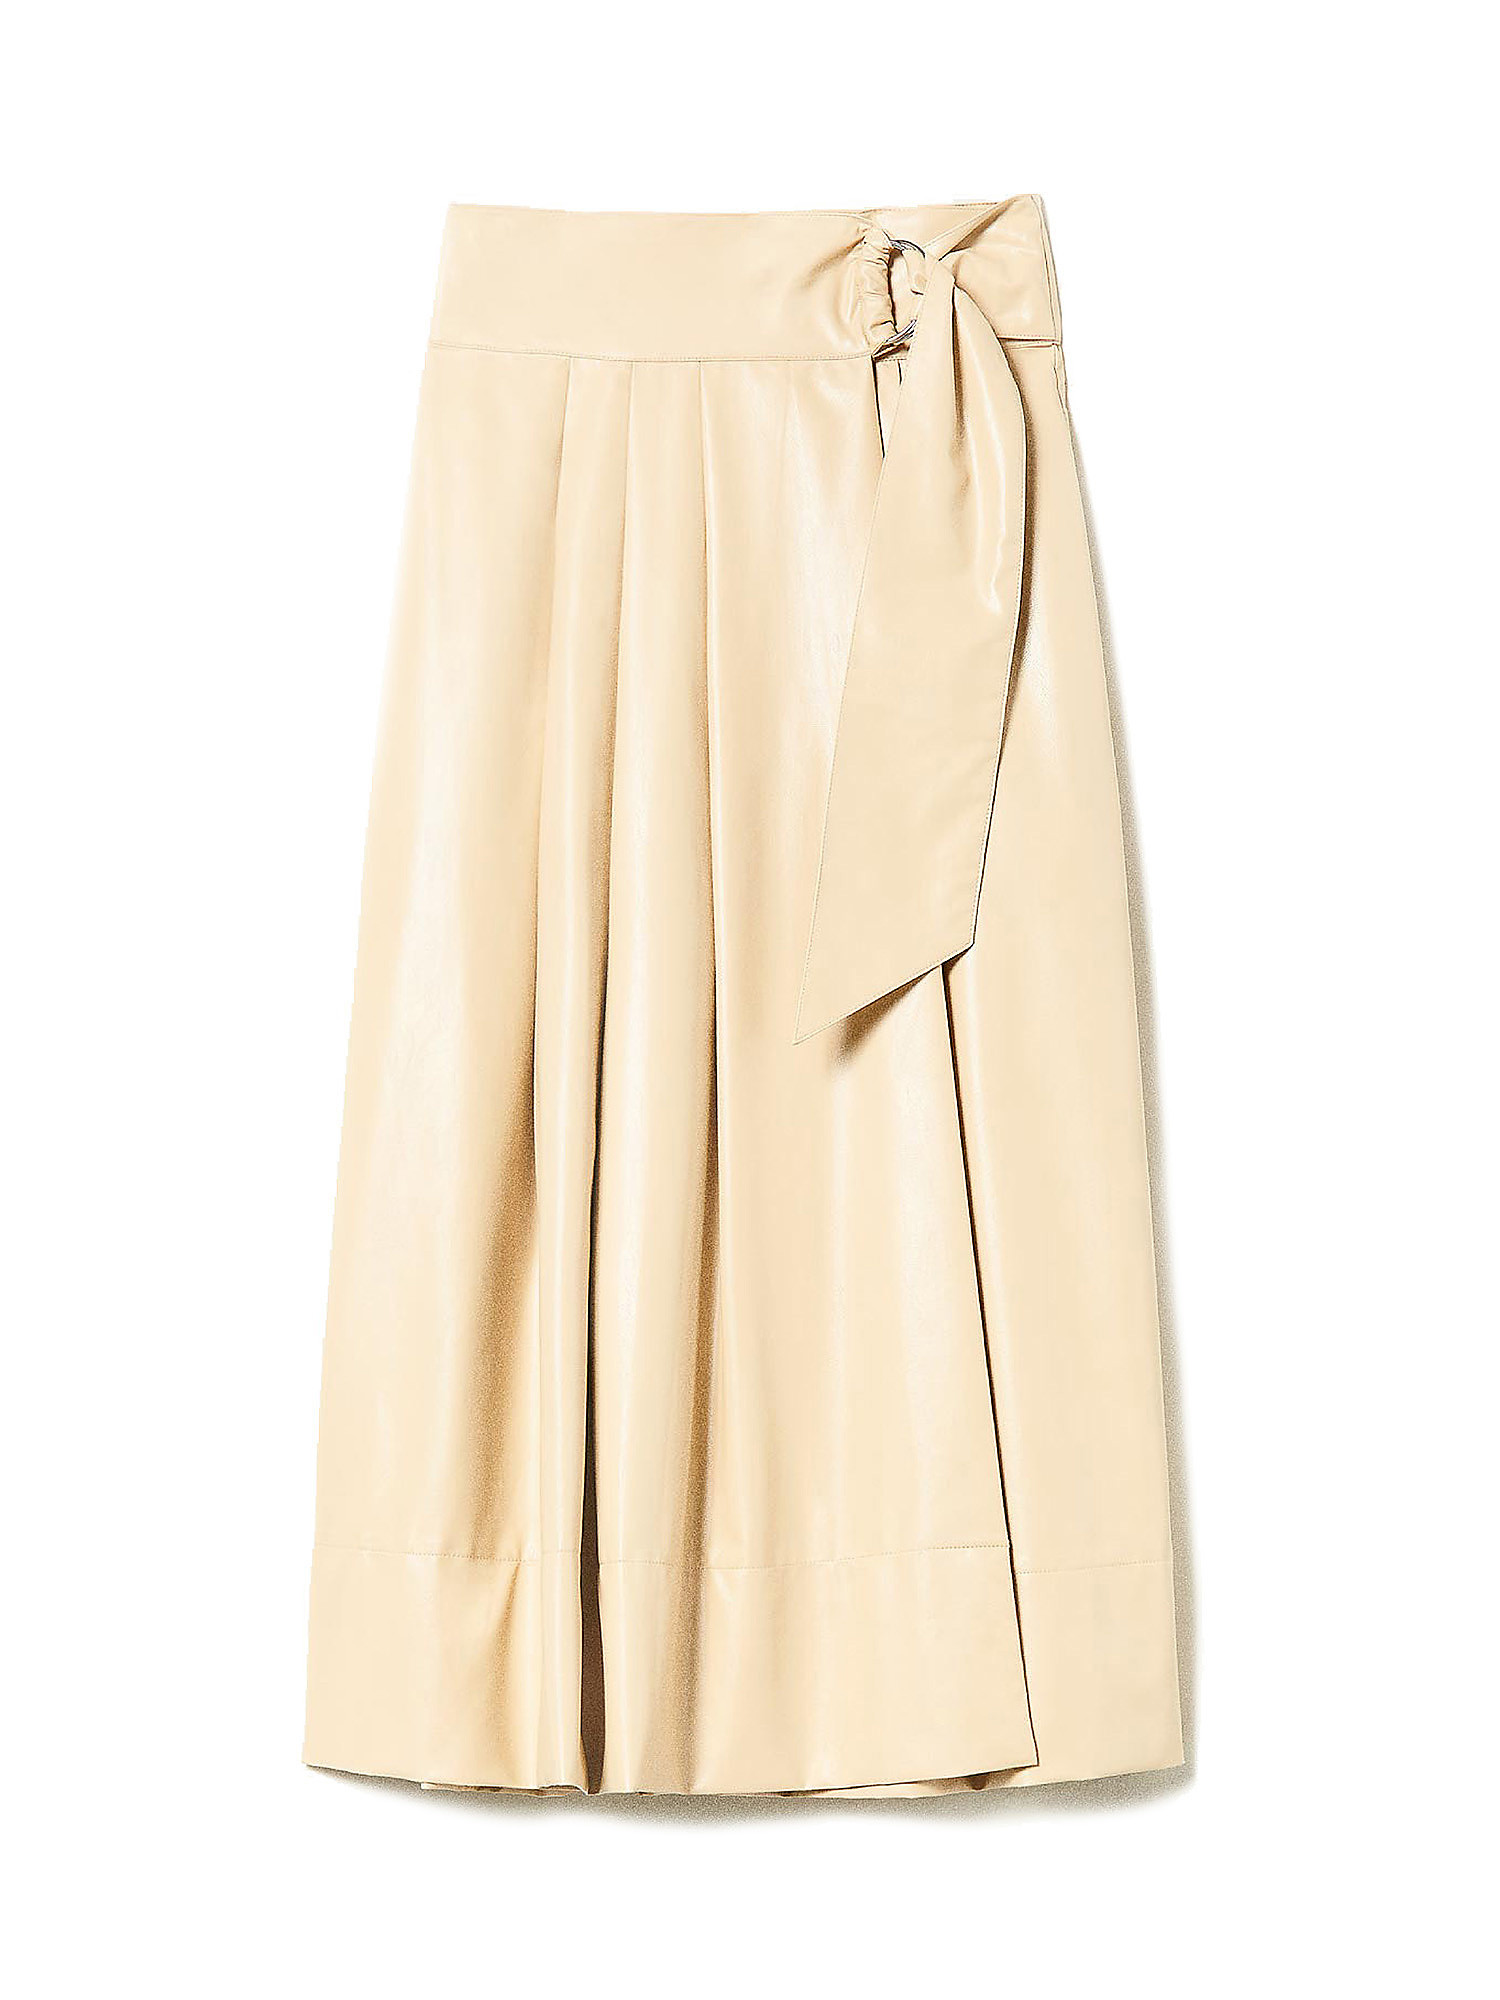 High waisted skirt with belt, Cream, large image number 0